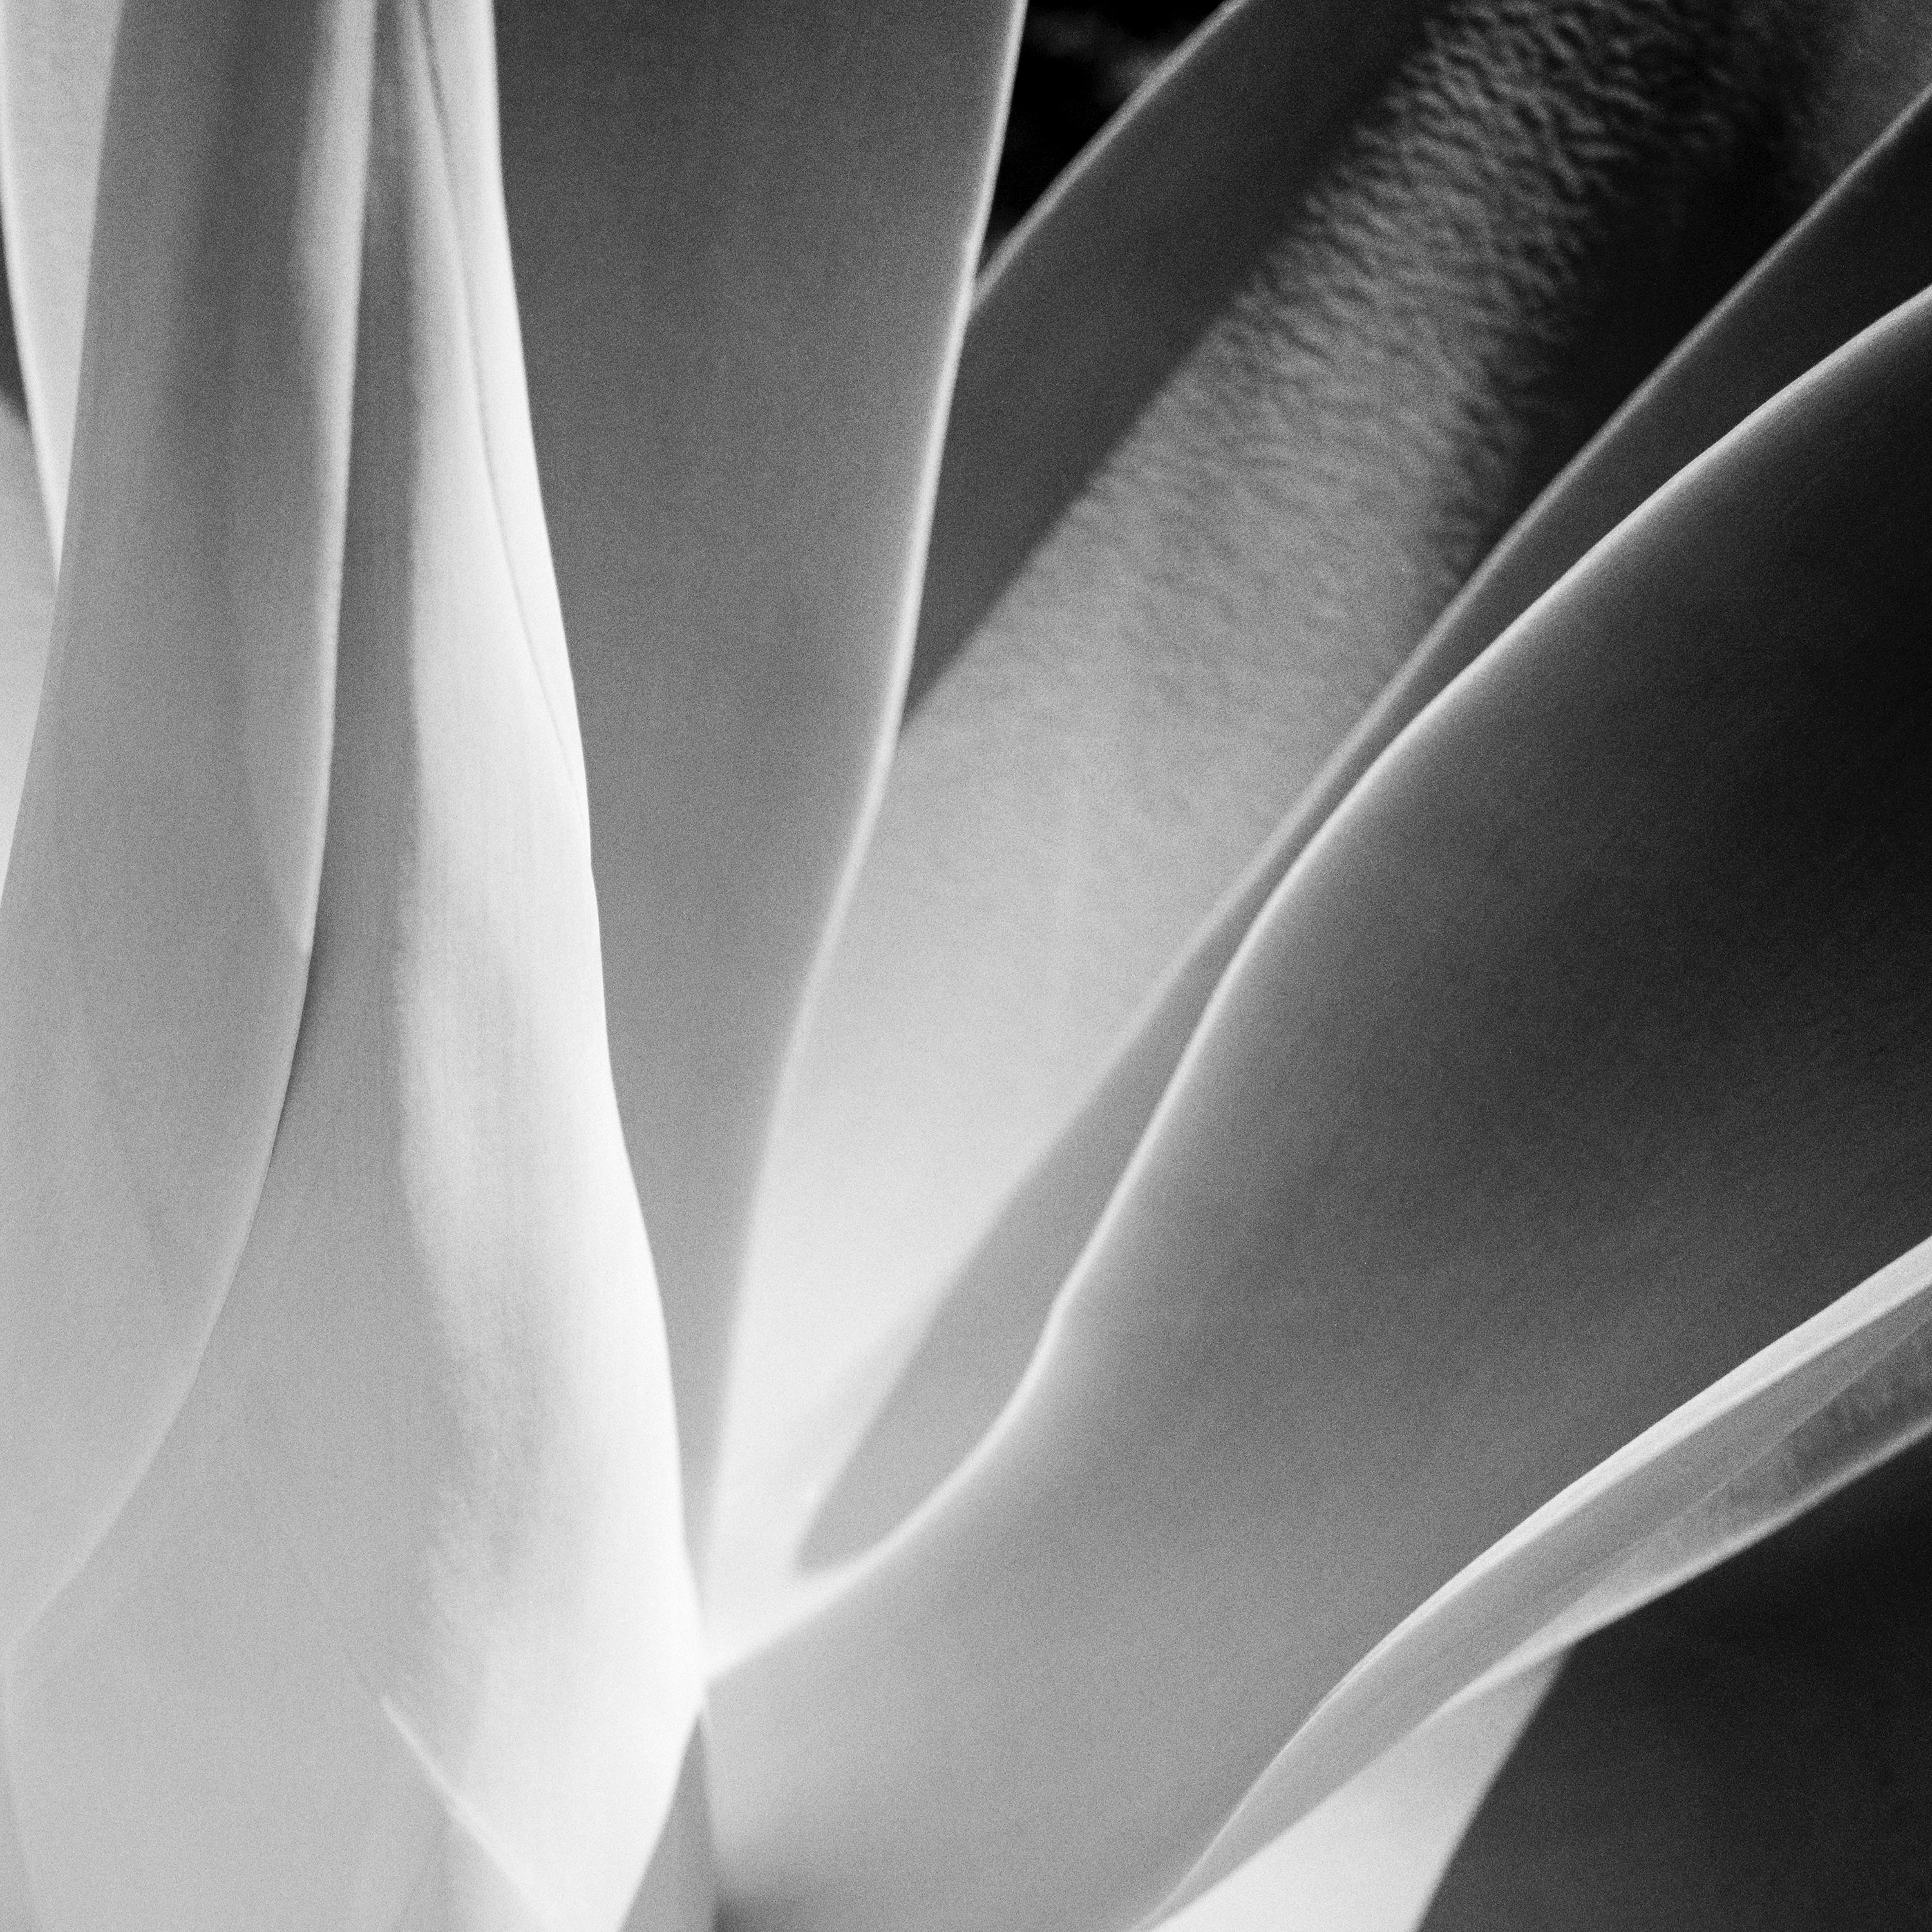 Blue Agave, Arizona, USA, abstract black and white art photography, landscape For Sale 2